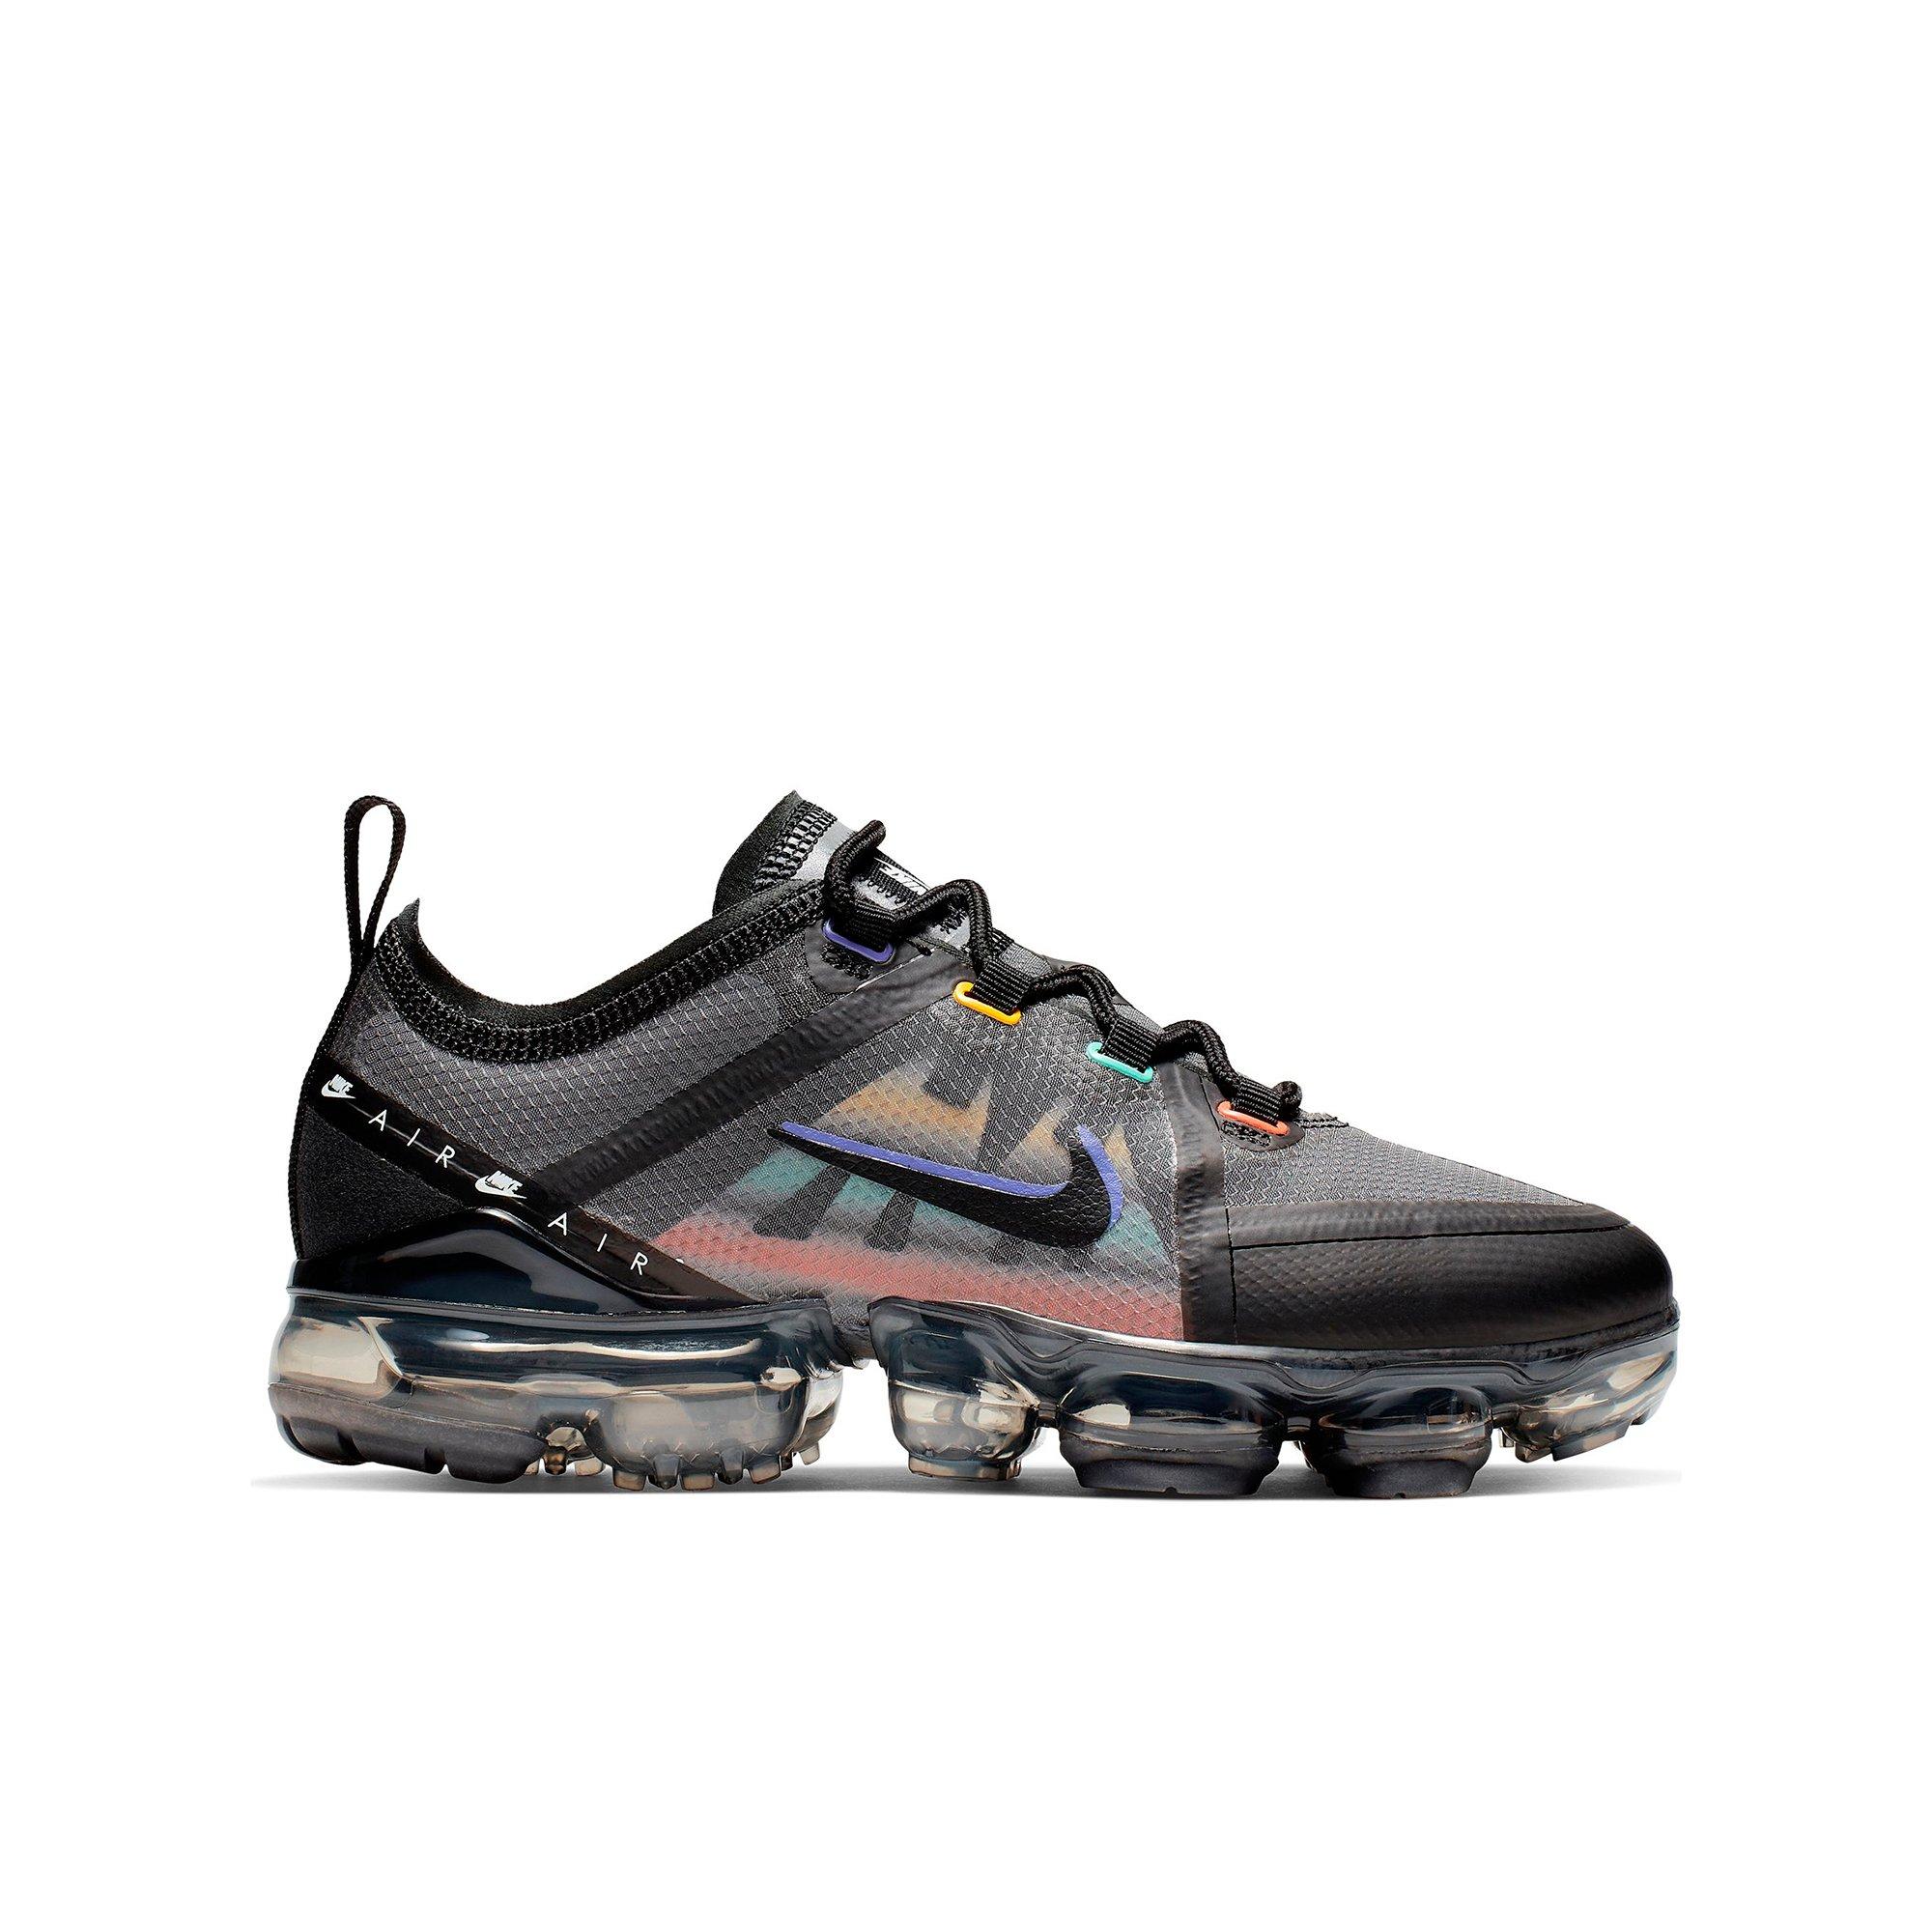 vapormax black with colors